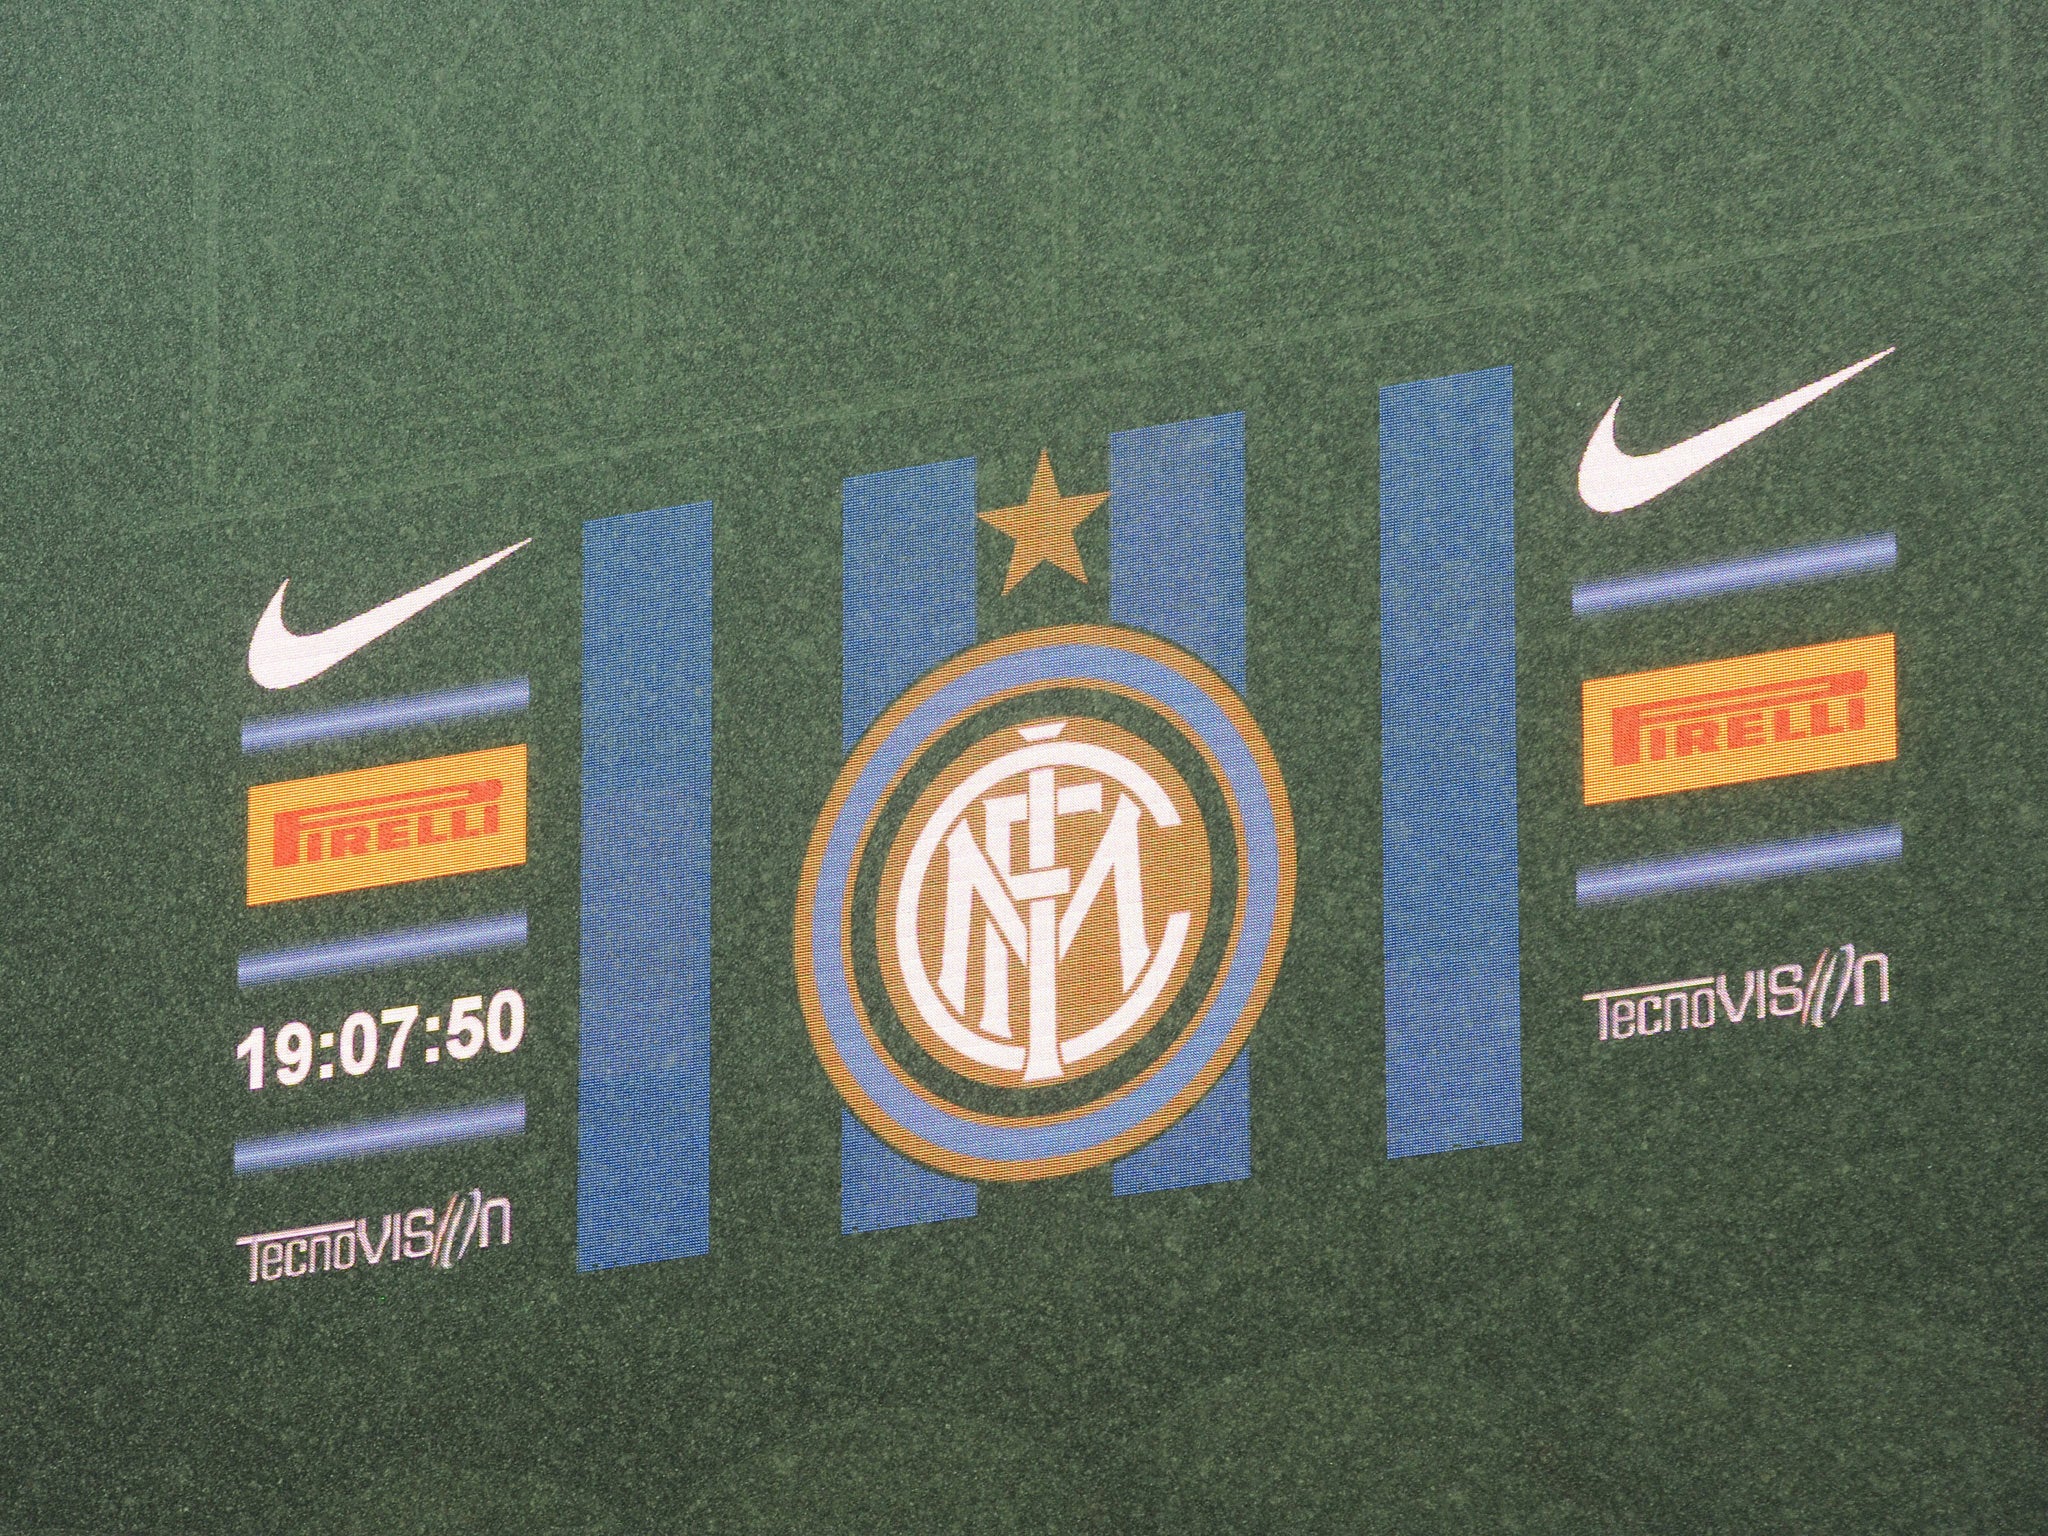 A view of the scoreboard at the San Siro depicting the badge of Inter Milan